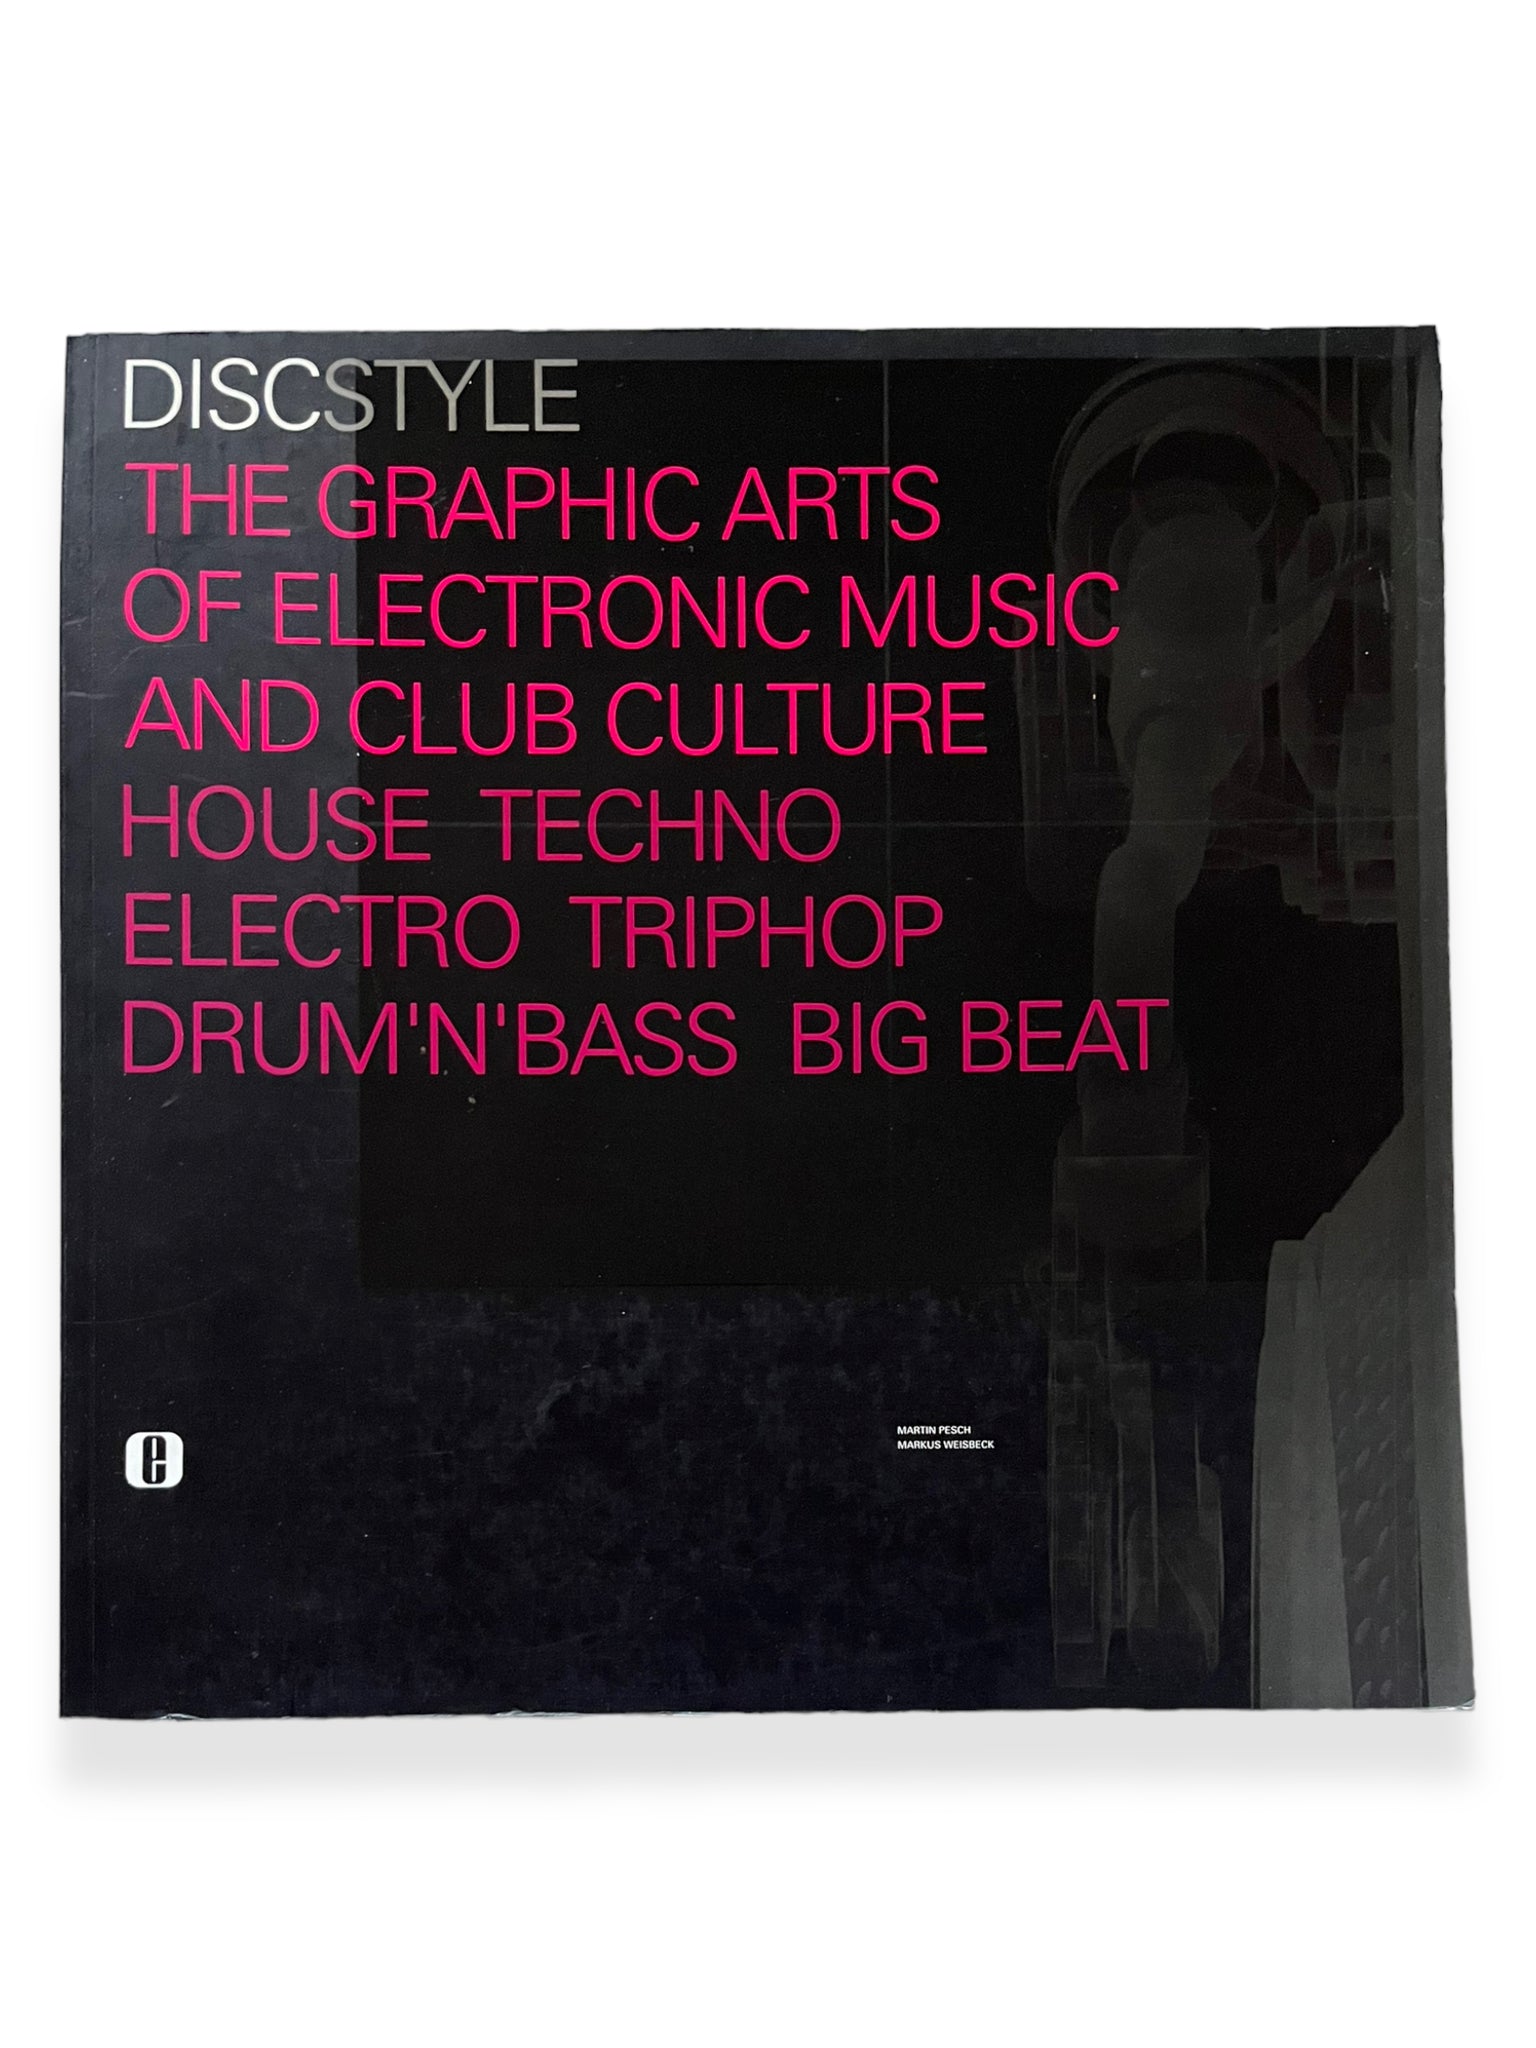 Discstyle: the Graphic Arts of Electronic Music and Club Culture.